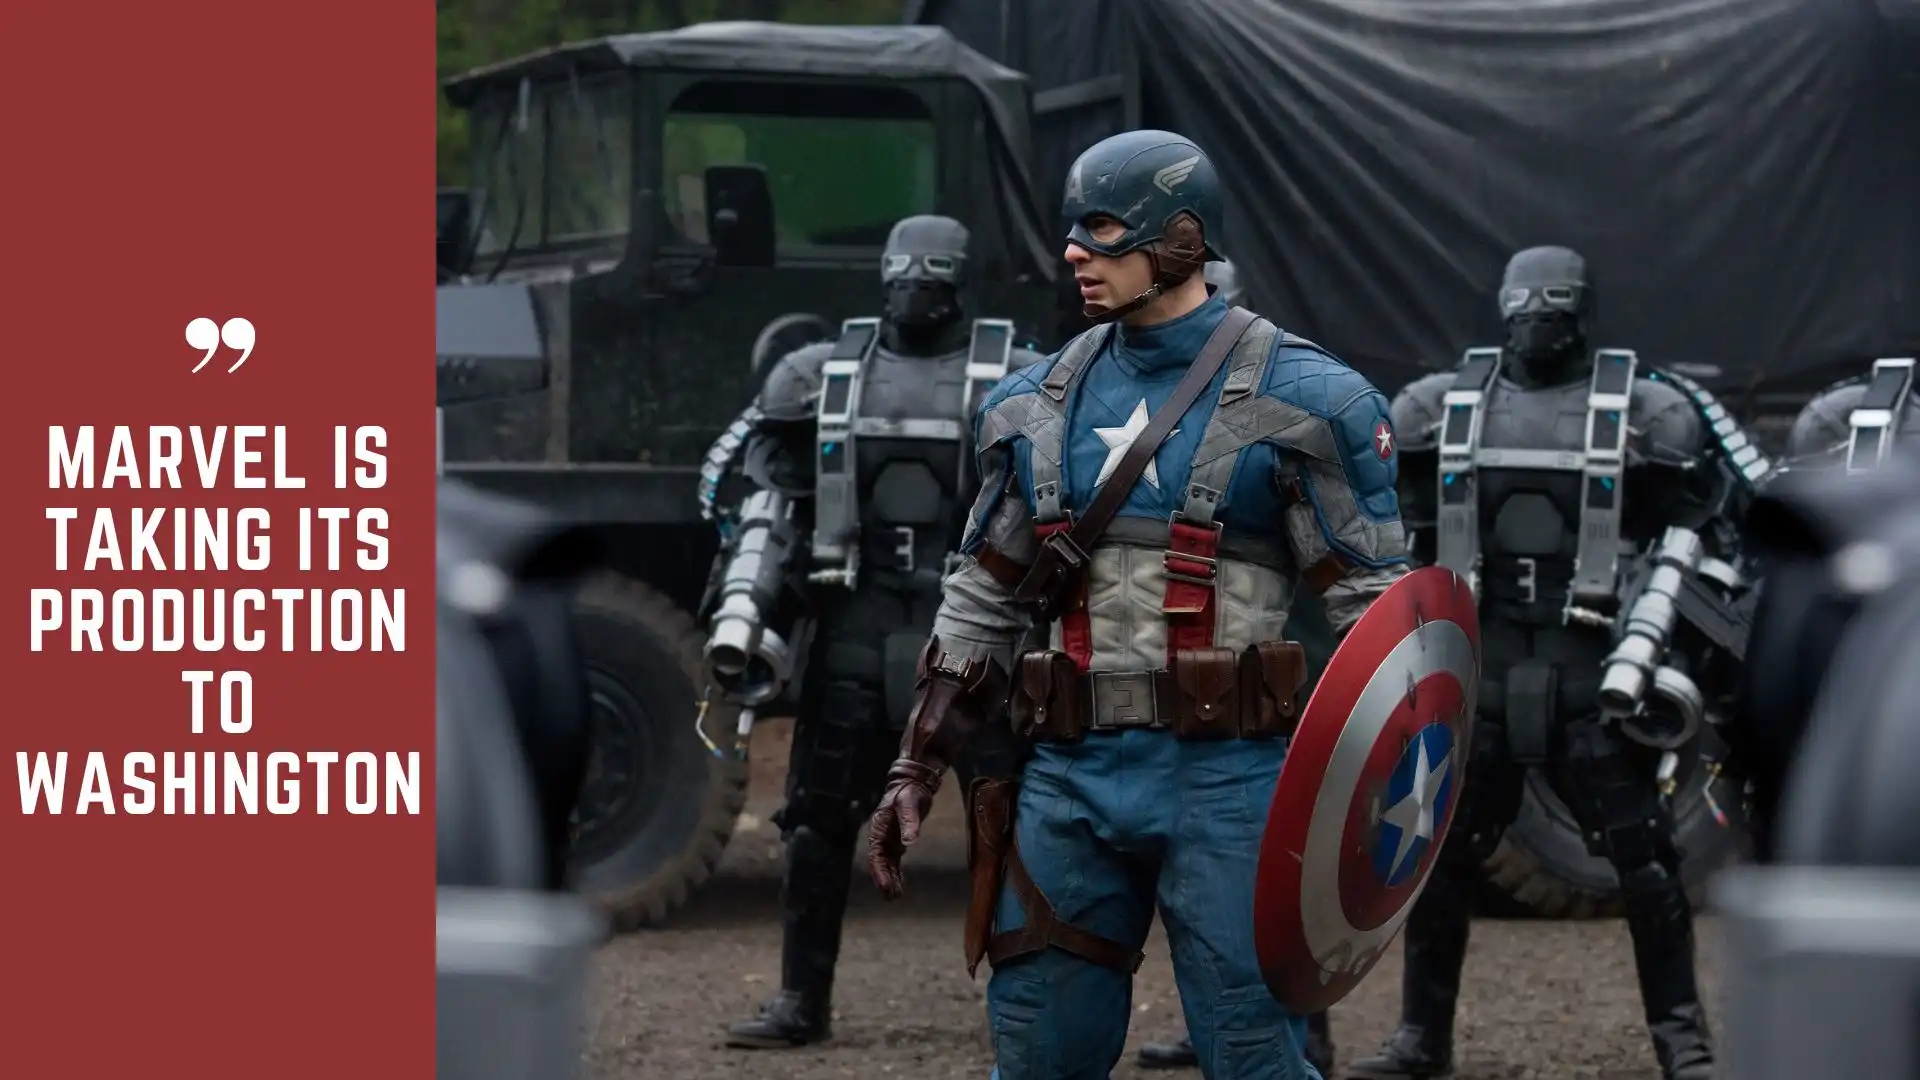 Marvel is taking its production to Washington (Image credit: collider)